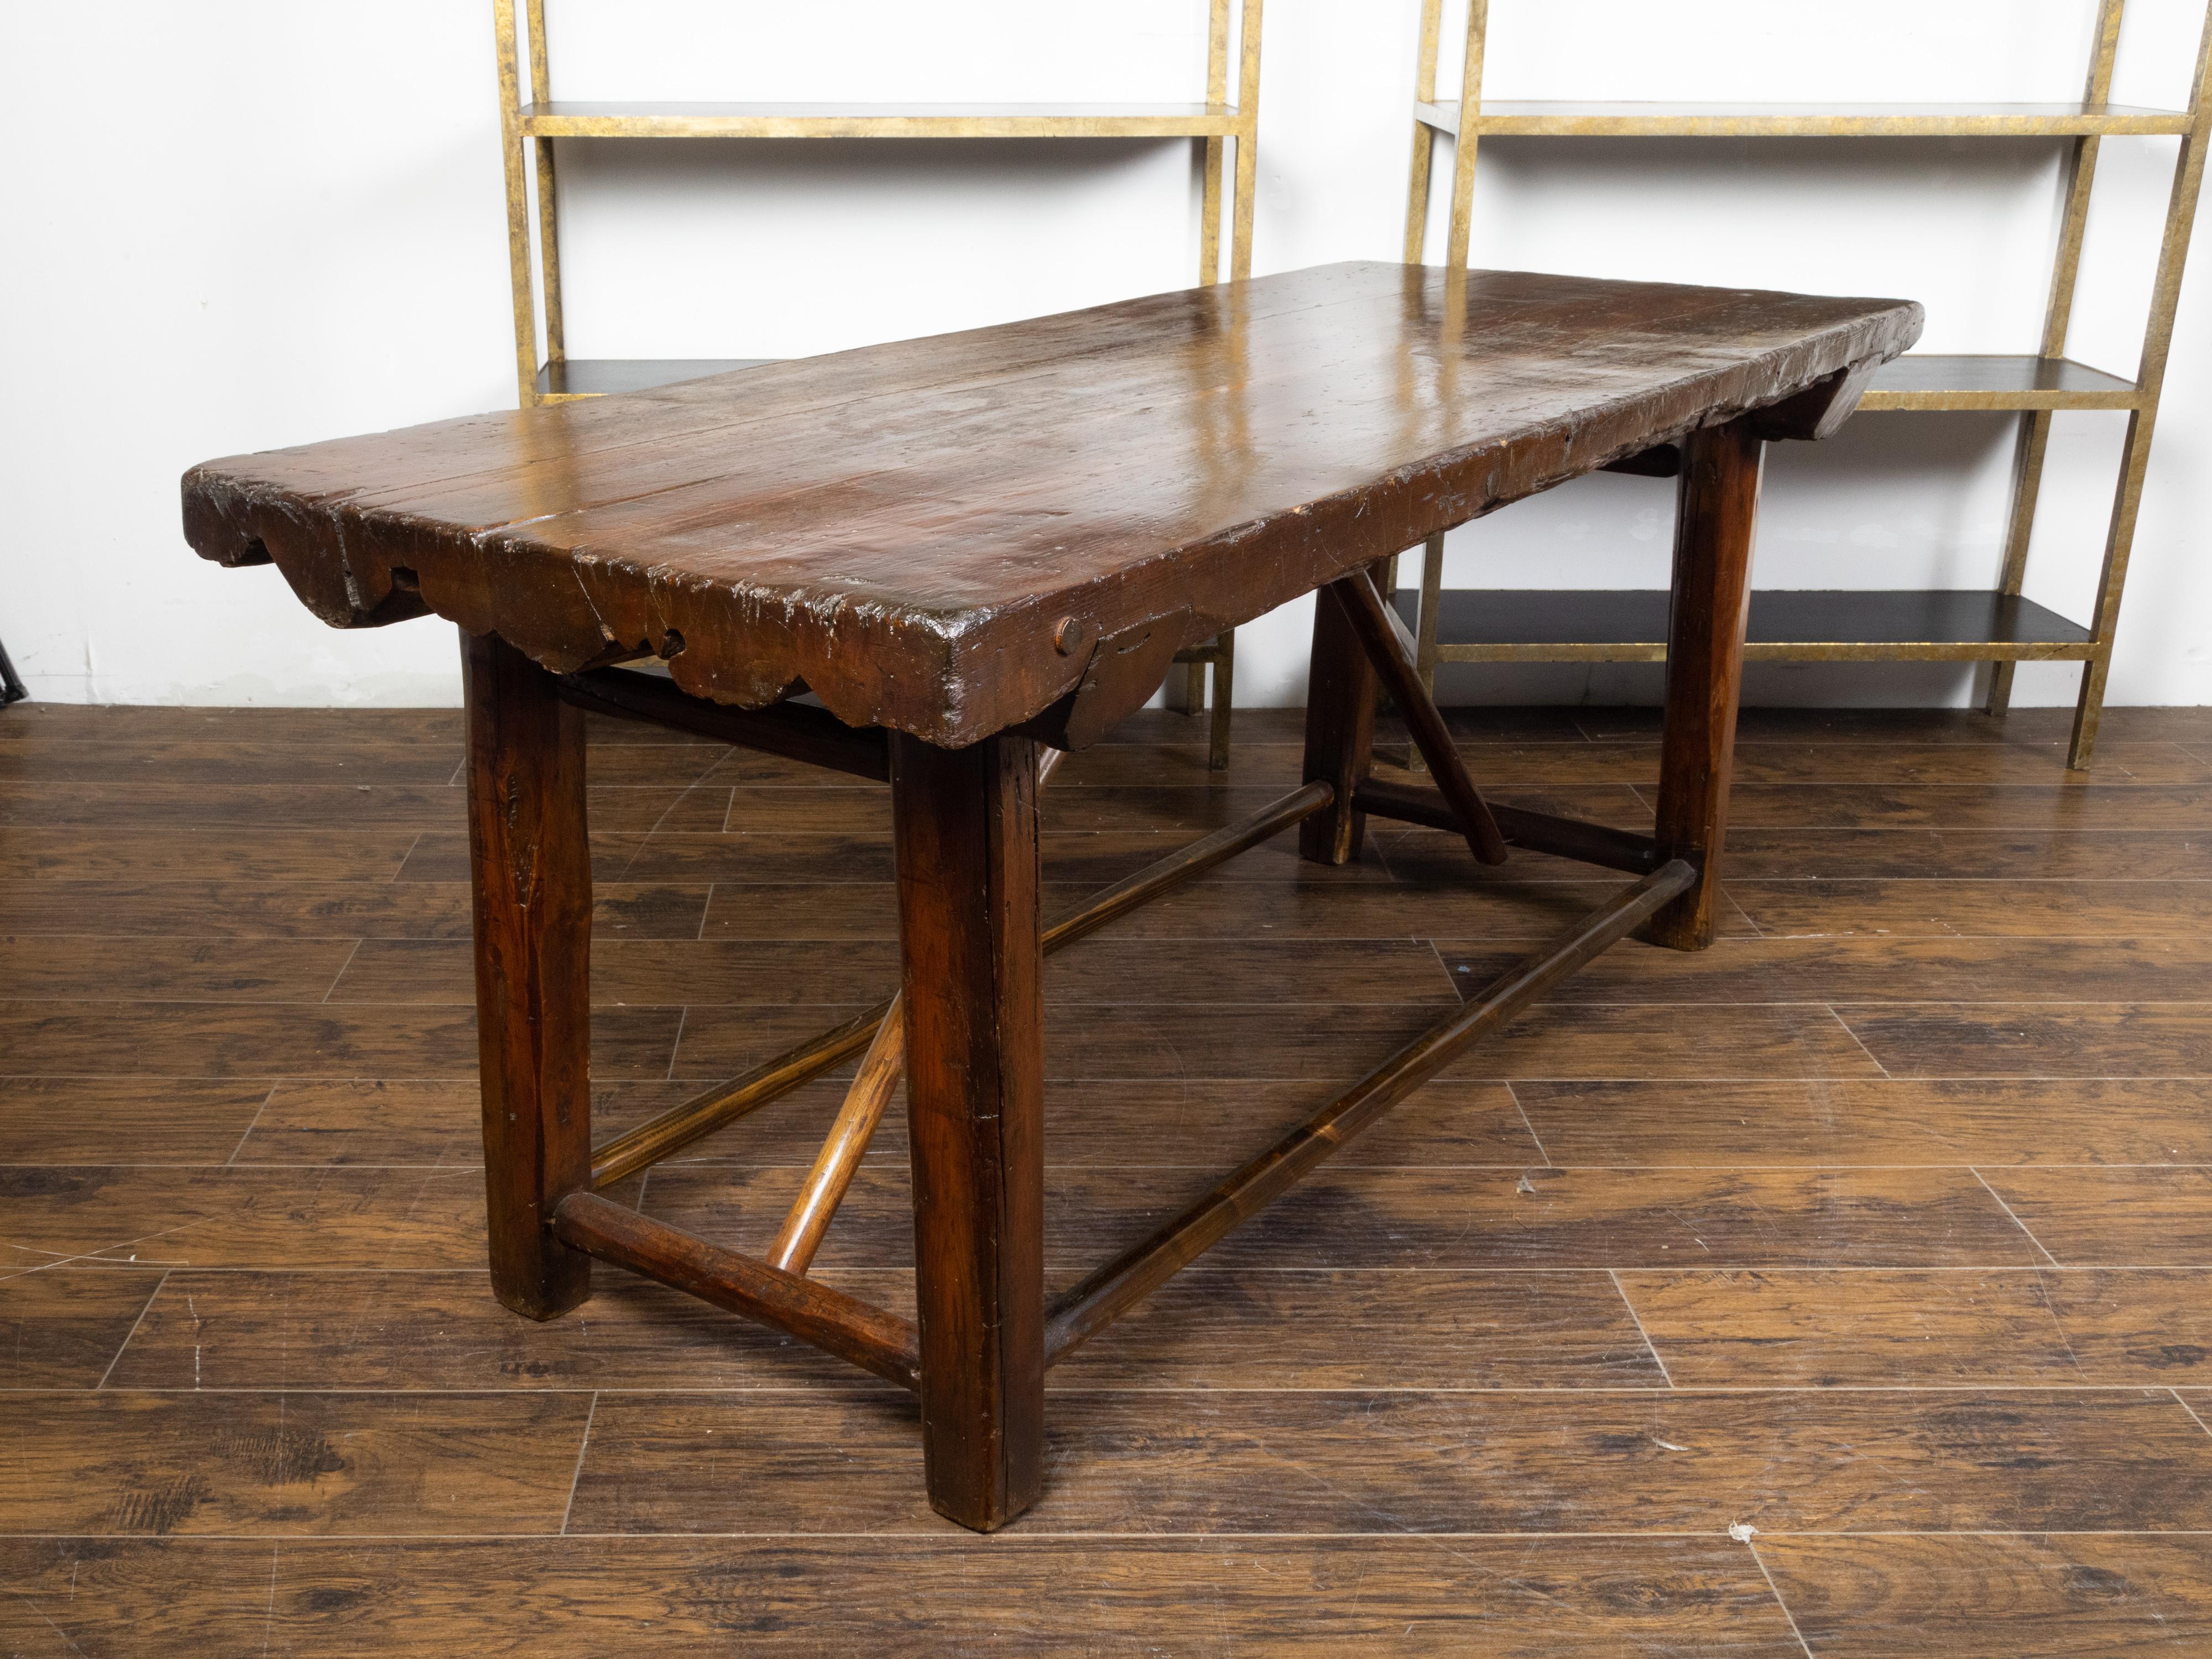 American 1900s Rustic Pine Log Table with Straight Legs and Side Stretchers In Good Condition For Sale In Atlanta, GA